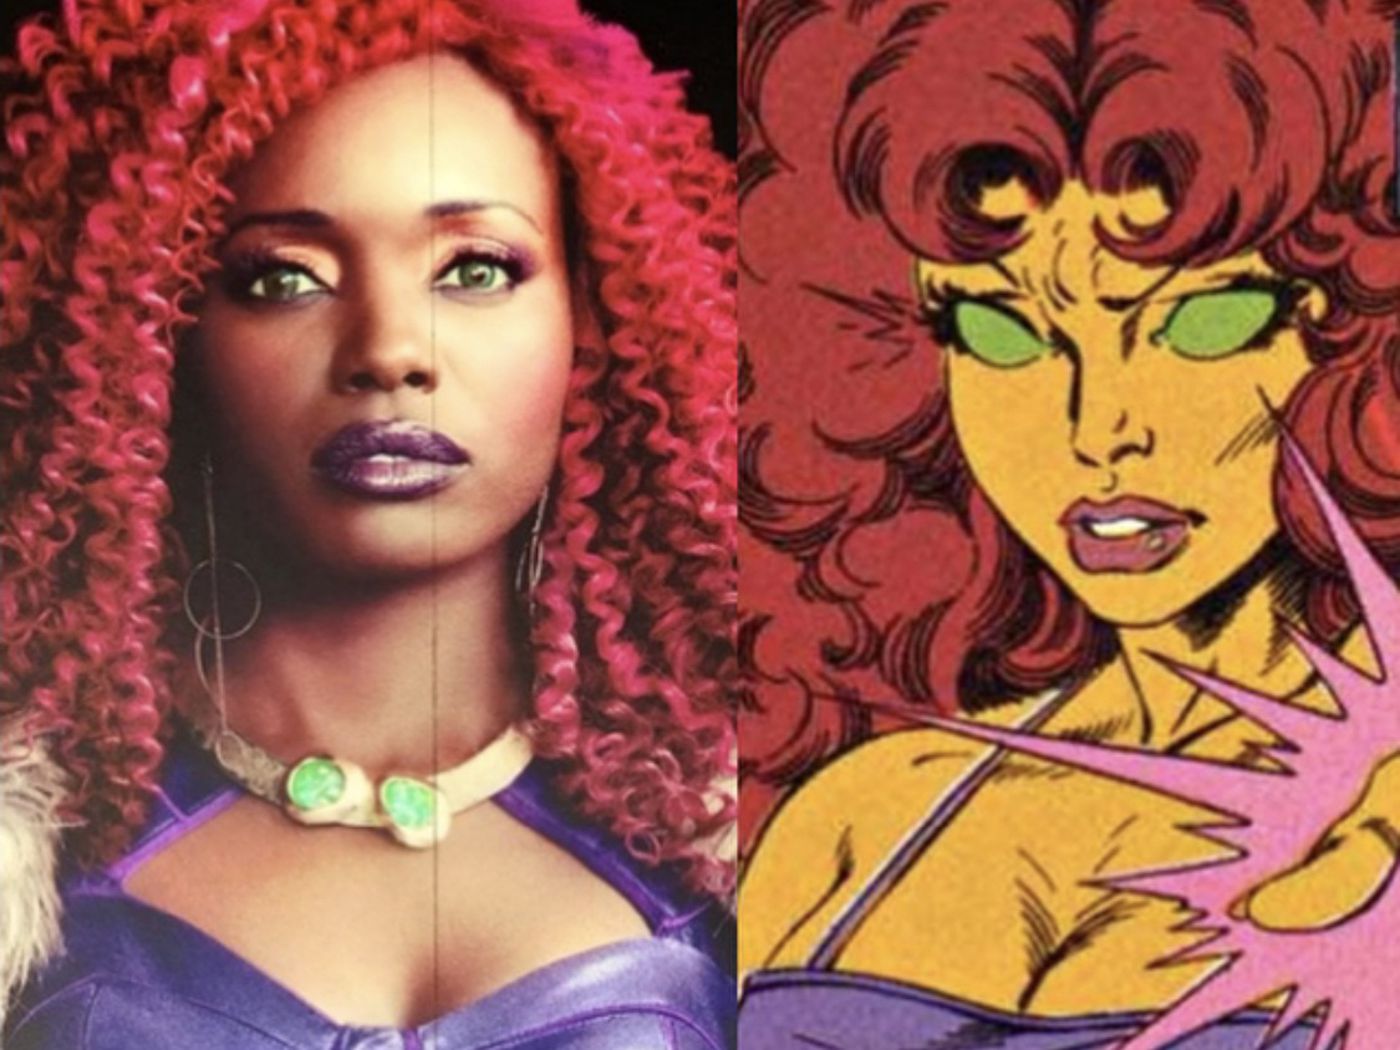 Anna Diop As Starfire Wallpapers